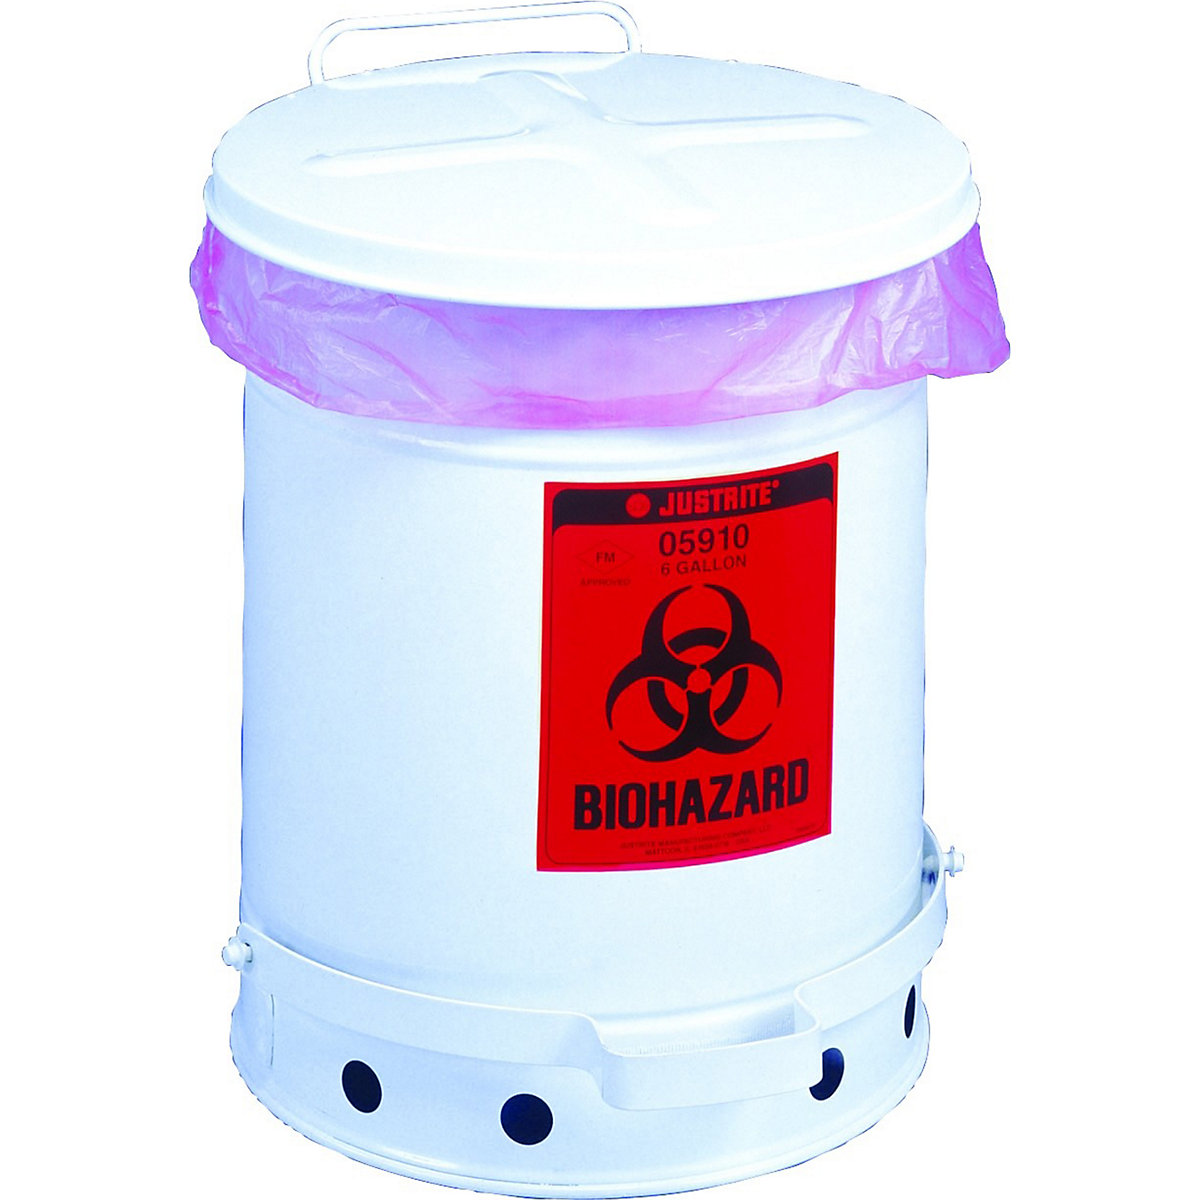 Sheet steel safety disposal can for biohazardous waste – Justrite, BIOHAZARD sticker, capacity 34 l, with pedal, white-2